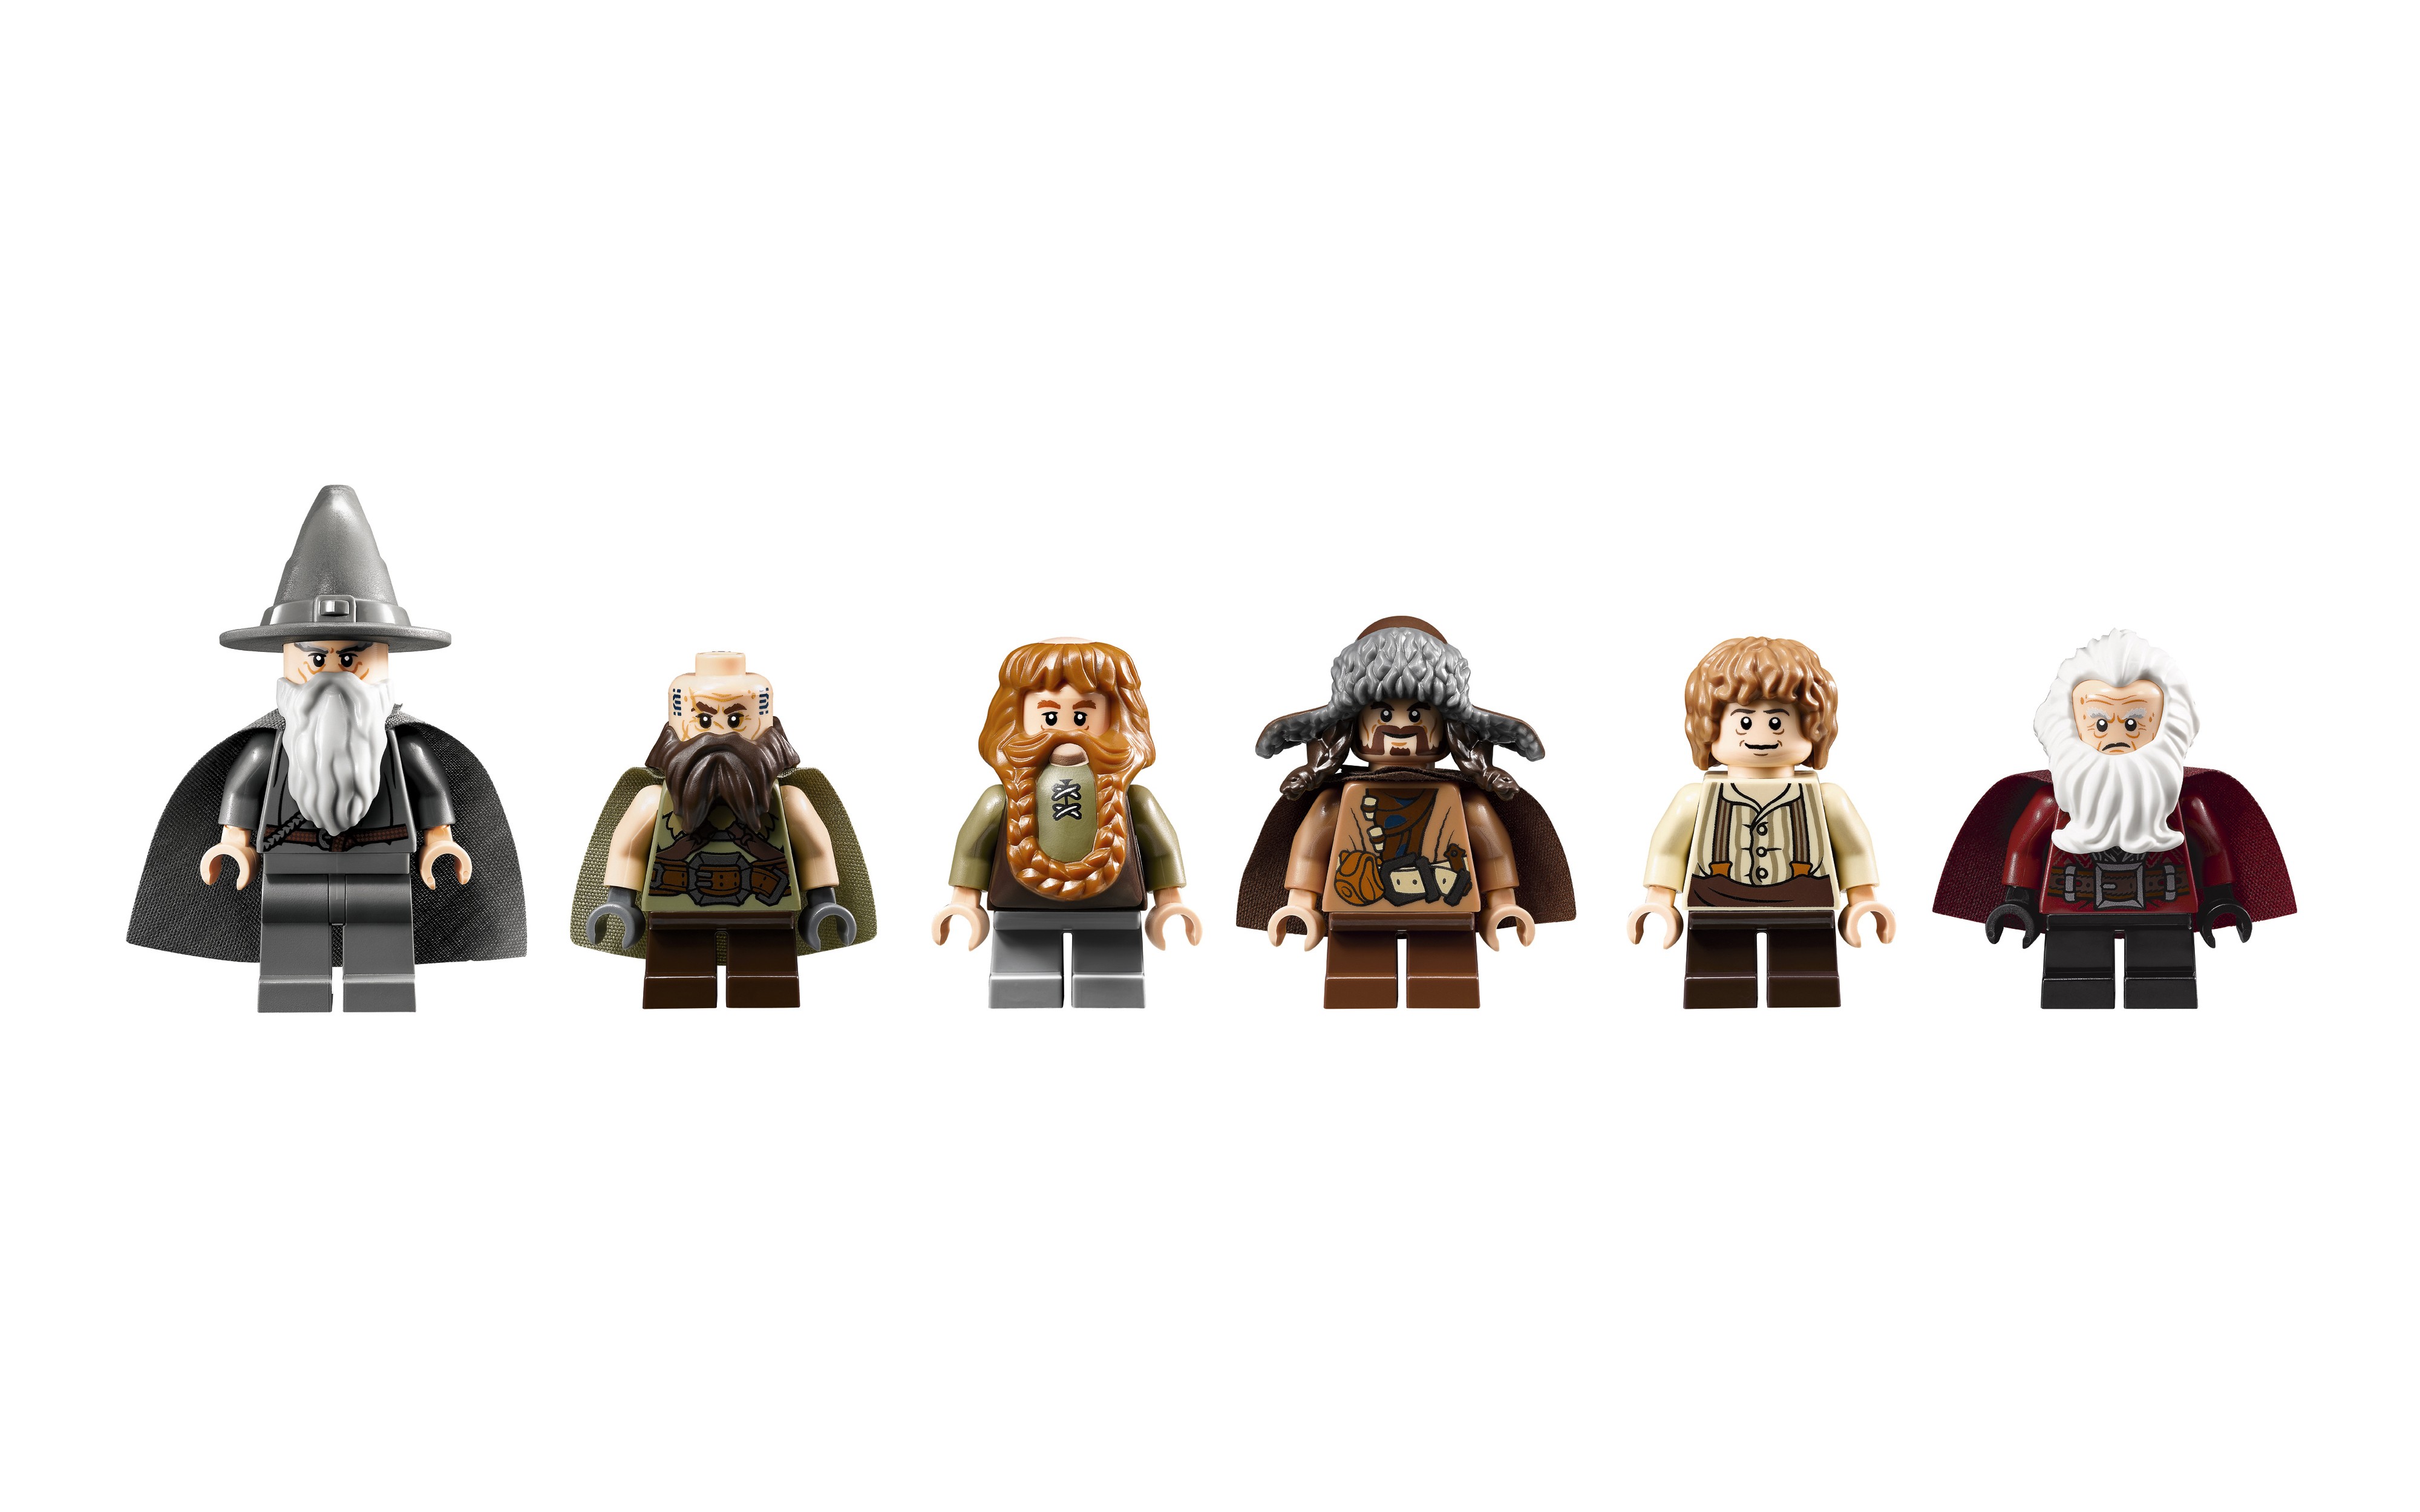 General 4000x2500 LEGO The Hobbit toys simple background white background Gandalf Bilbo Baggins figurines Bofur Dwalin book characters